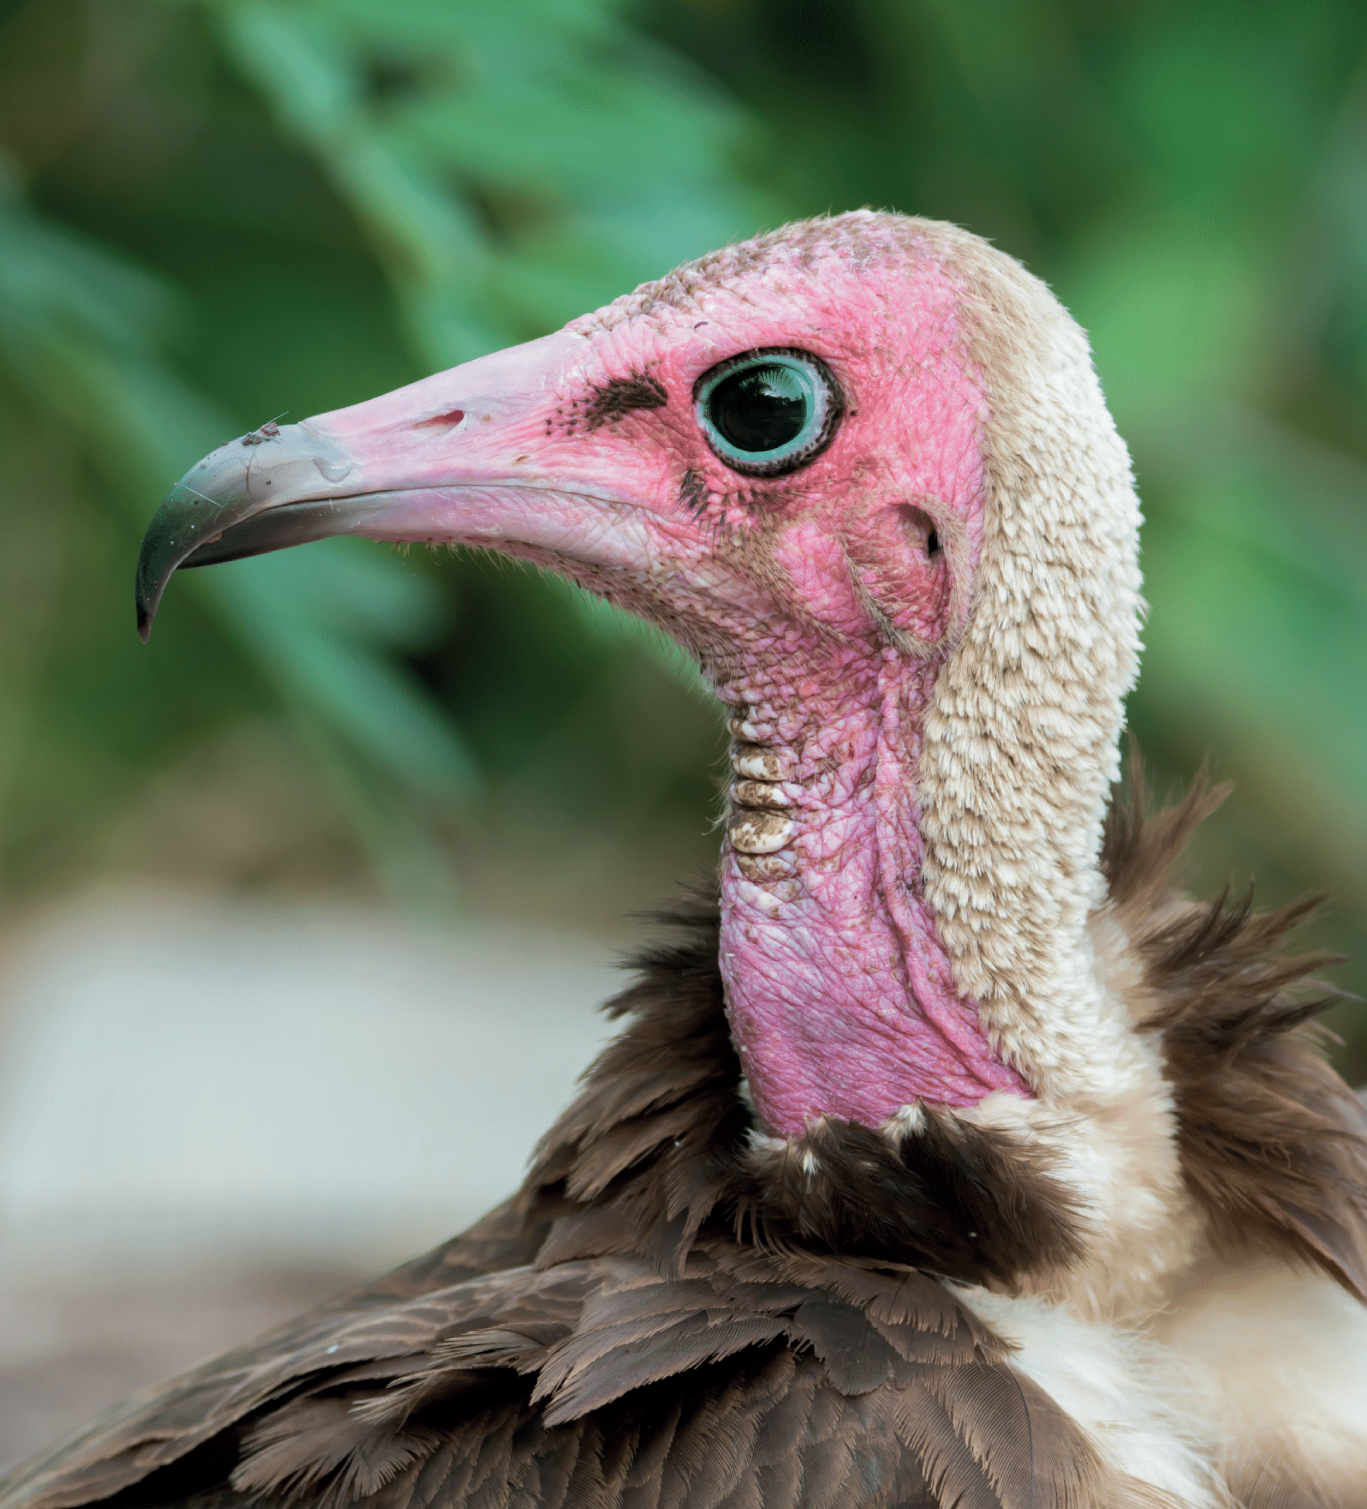 a close up of a hooded vulture